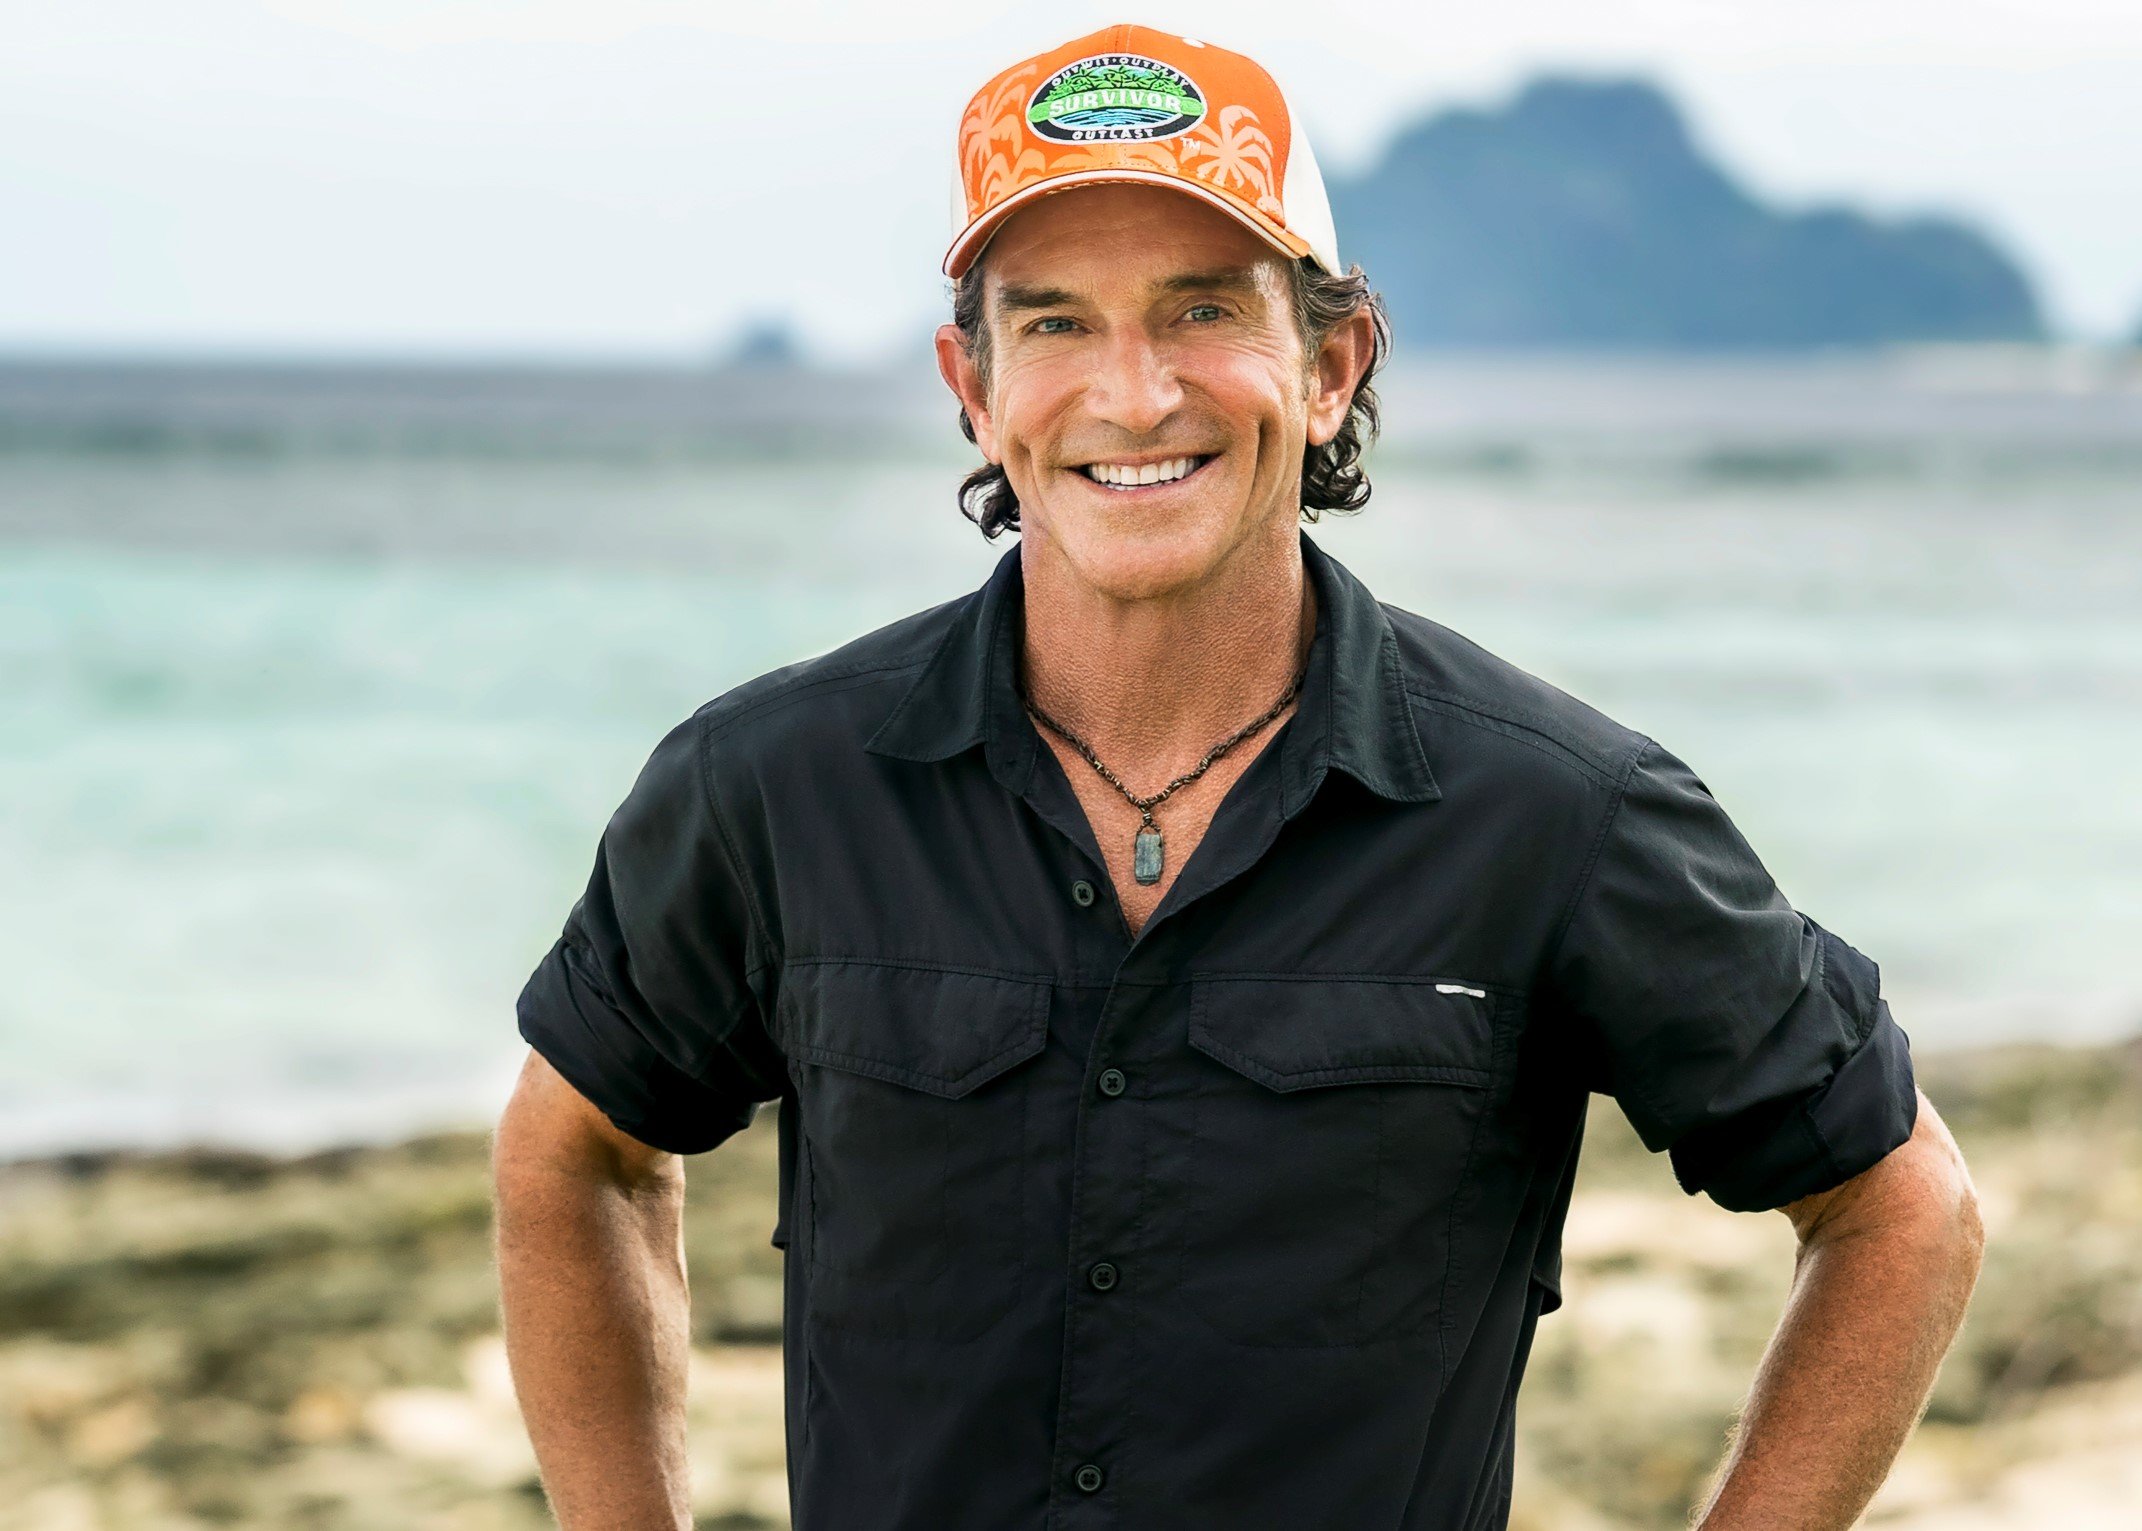 Jeff Probst, the host of 'Survivor' Season 42, which premieres on March 9, wears a black button-up shirt with rolled up sleeves above his elbows and an orange 'Survivor' hat.